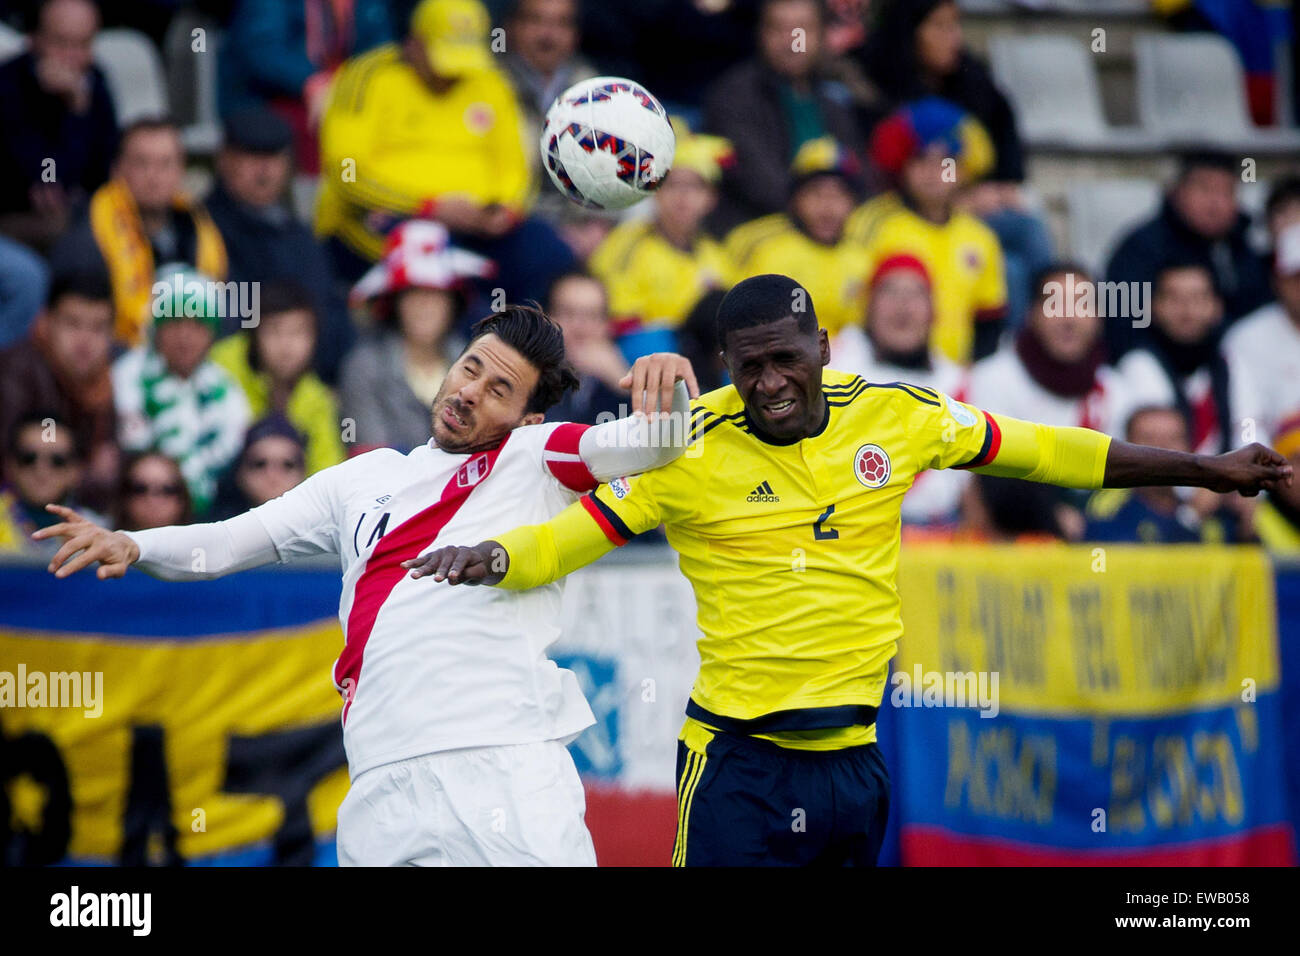 Temuco, Chile. 21st July, 2015. Colombia's Cristian Zapata (R) vies with Claudio Pizarro (L) of Peru during a Group C match at the 2015 America Cup, held at German Becker in Temuco, Chile, July 21, 2015. The match ended with 0-0. © Pedro Mera/Xinhua/Alamy Live News Stock Photo